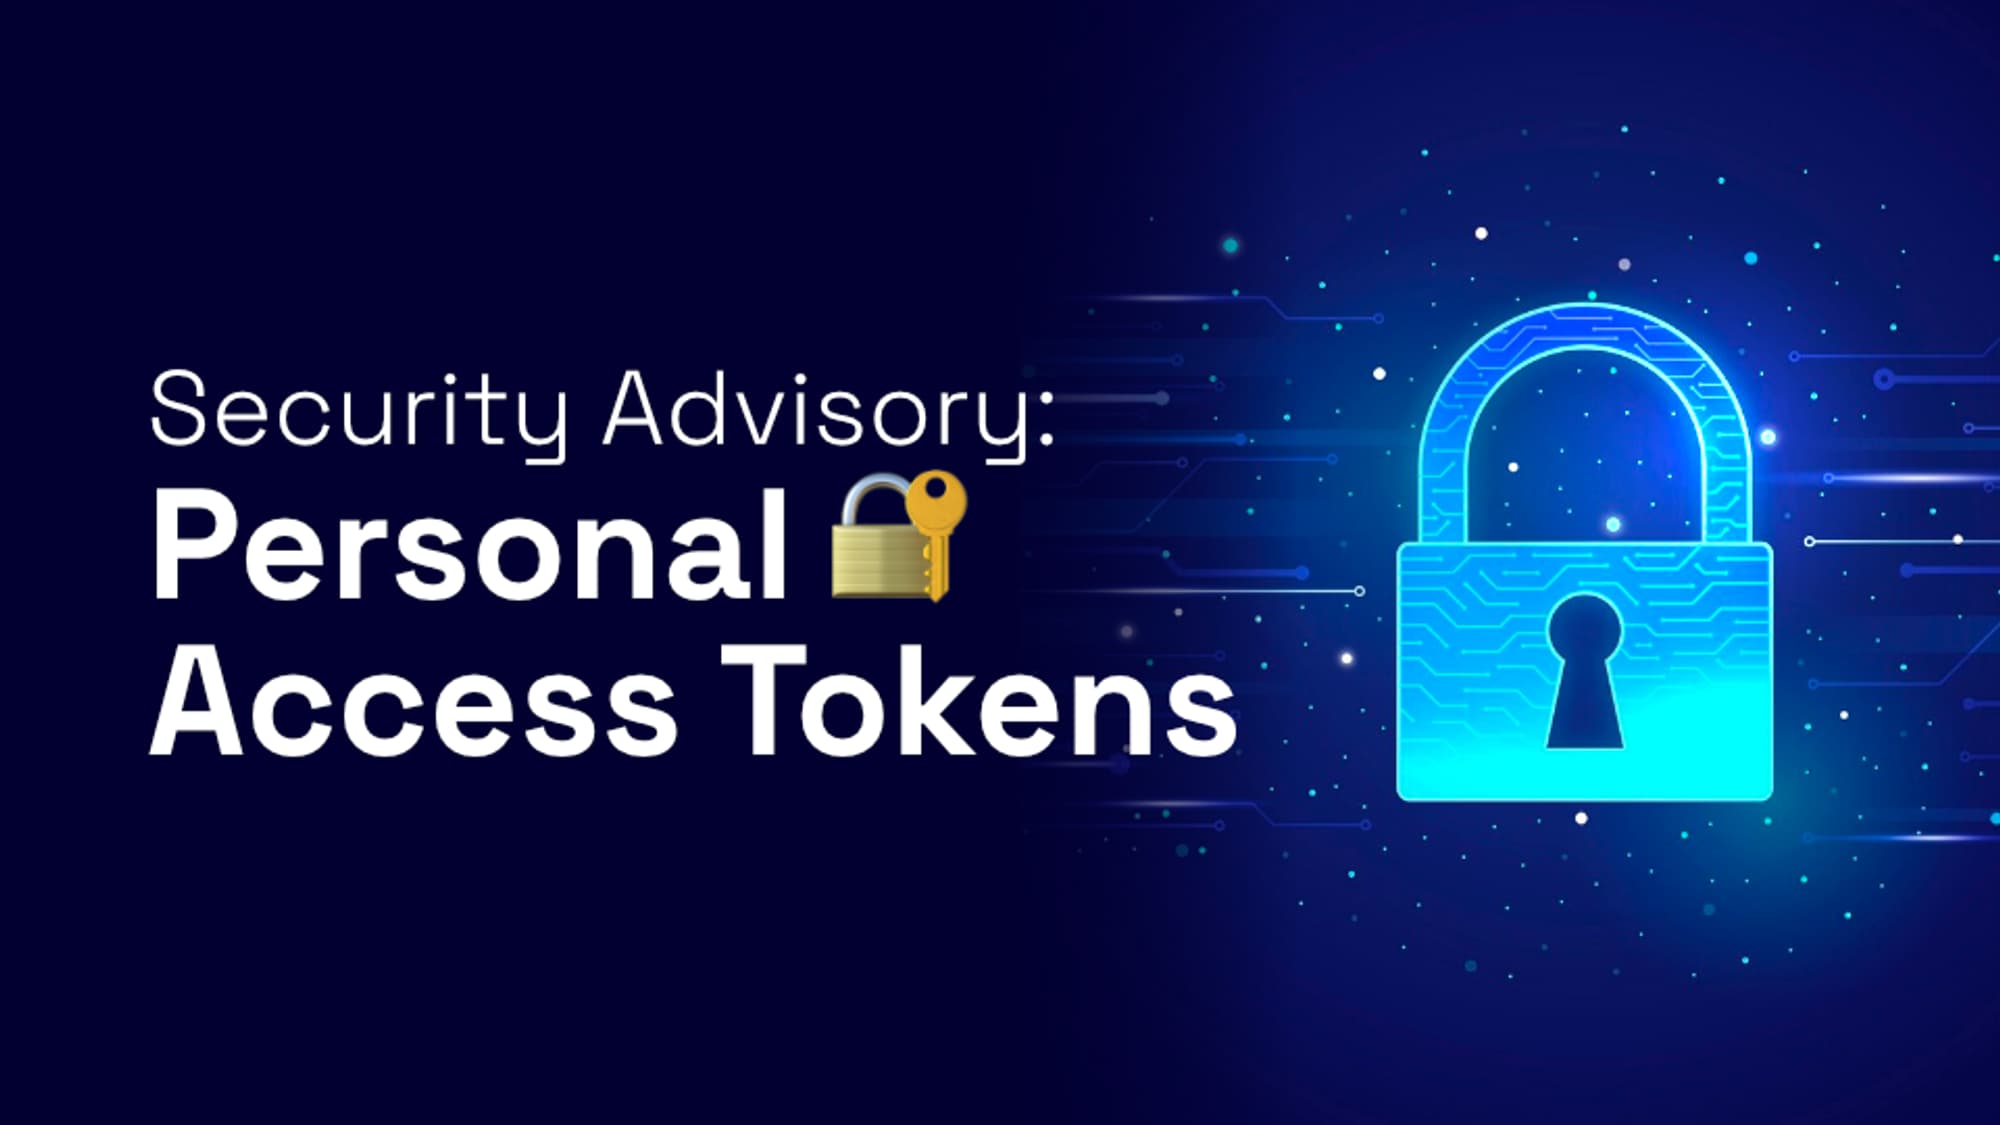 Security Advisory: Personal Access Tokens